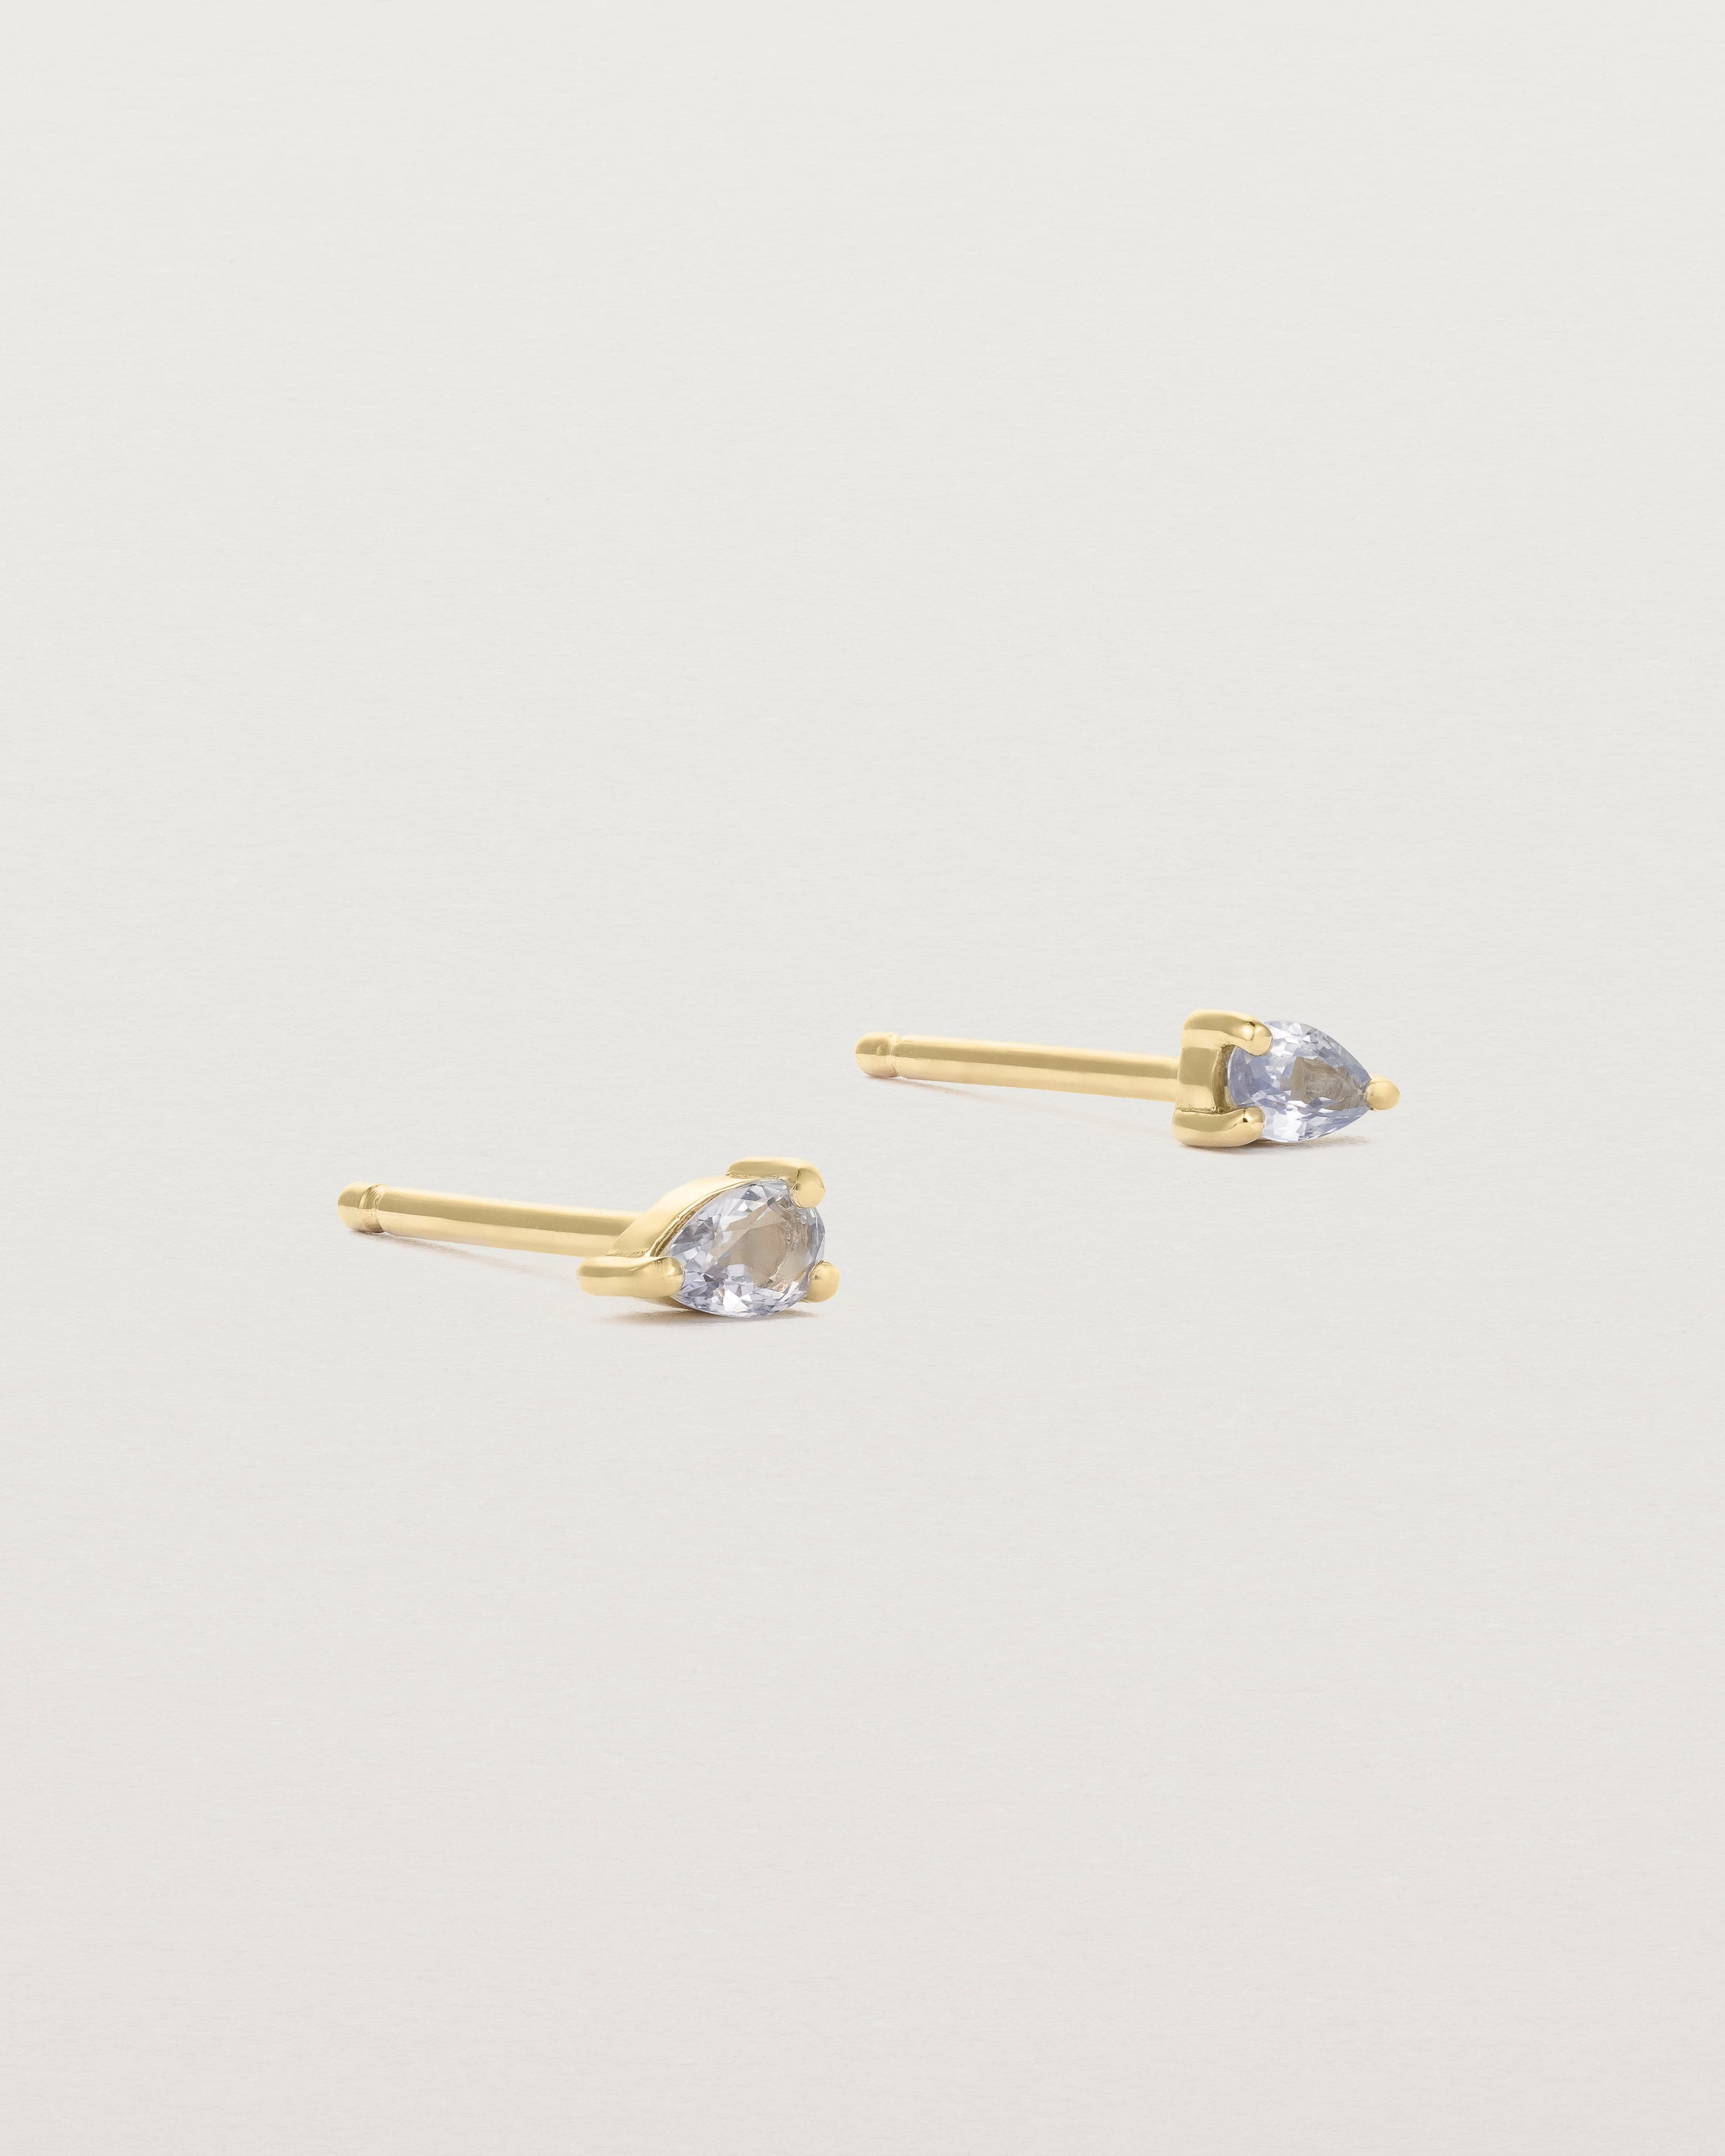 A pair of yellow gold studs featuring a pear cut pale blue sapphire